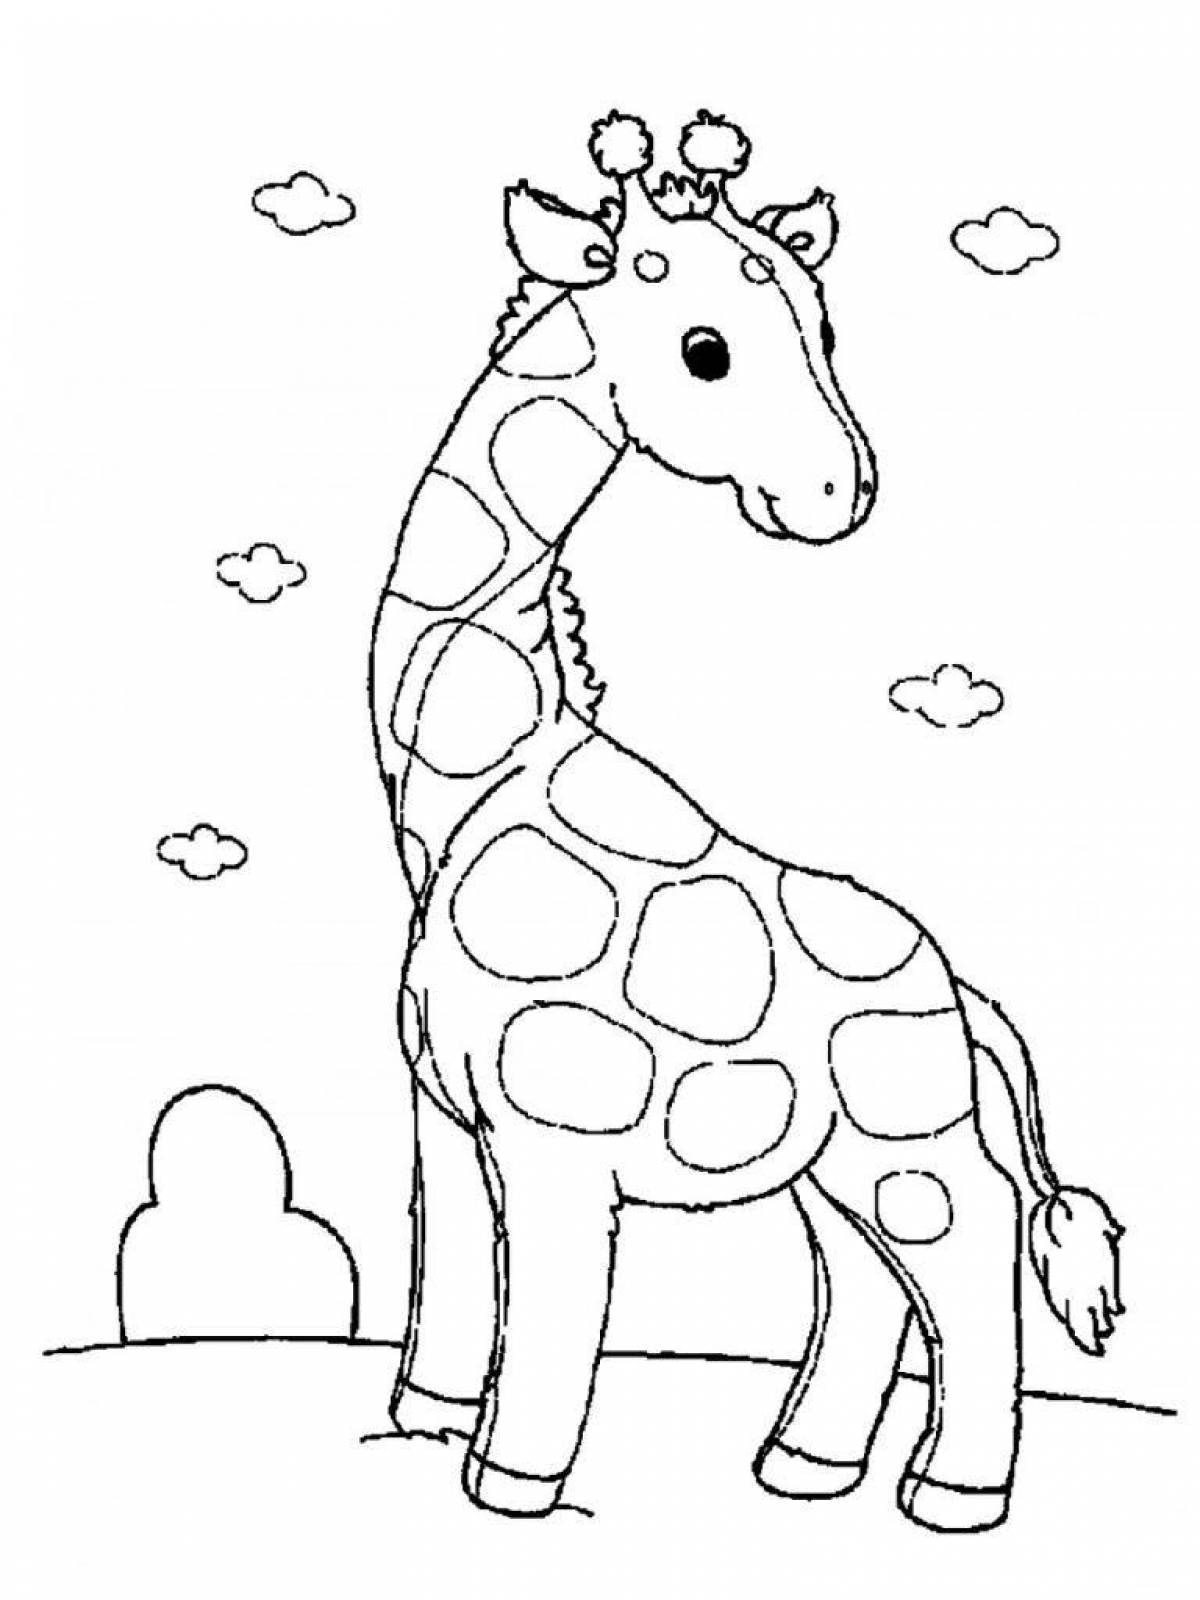 Magic giraffe coloring book for little students